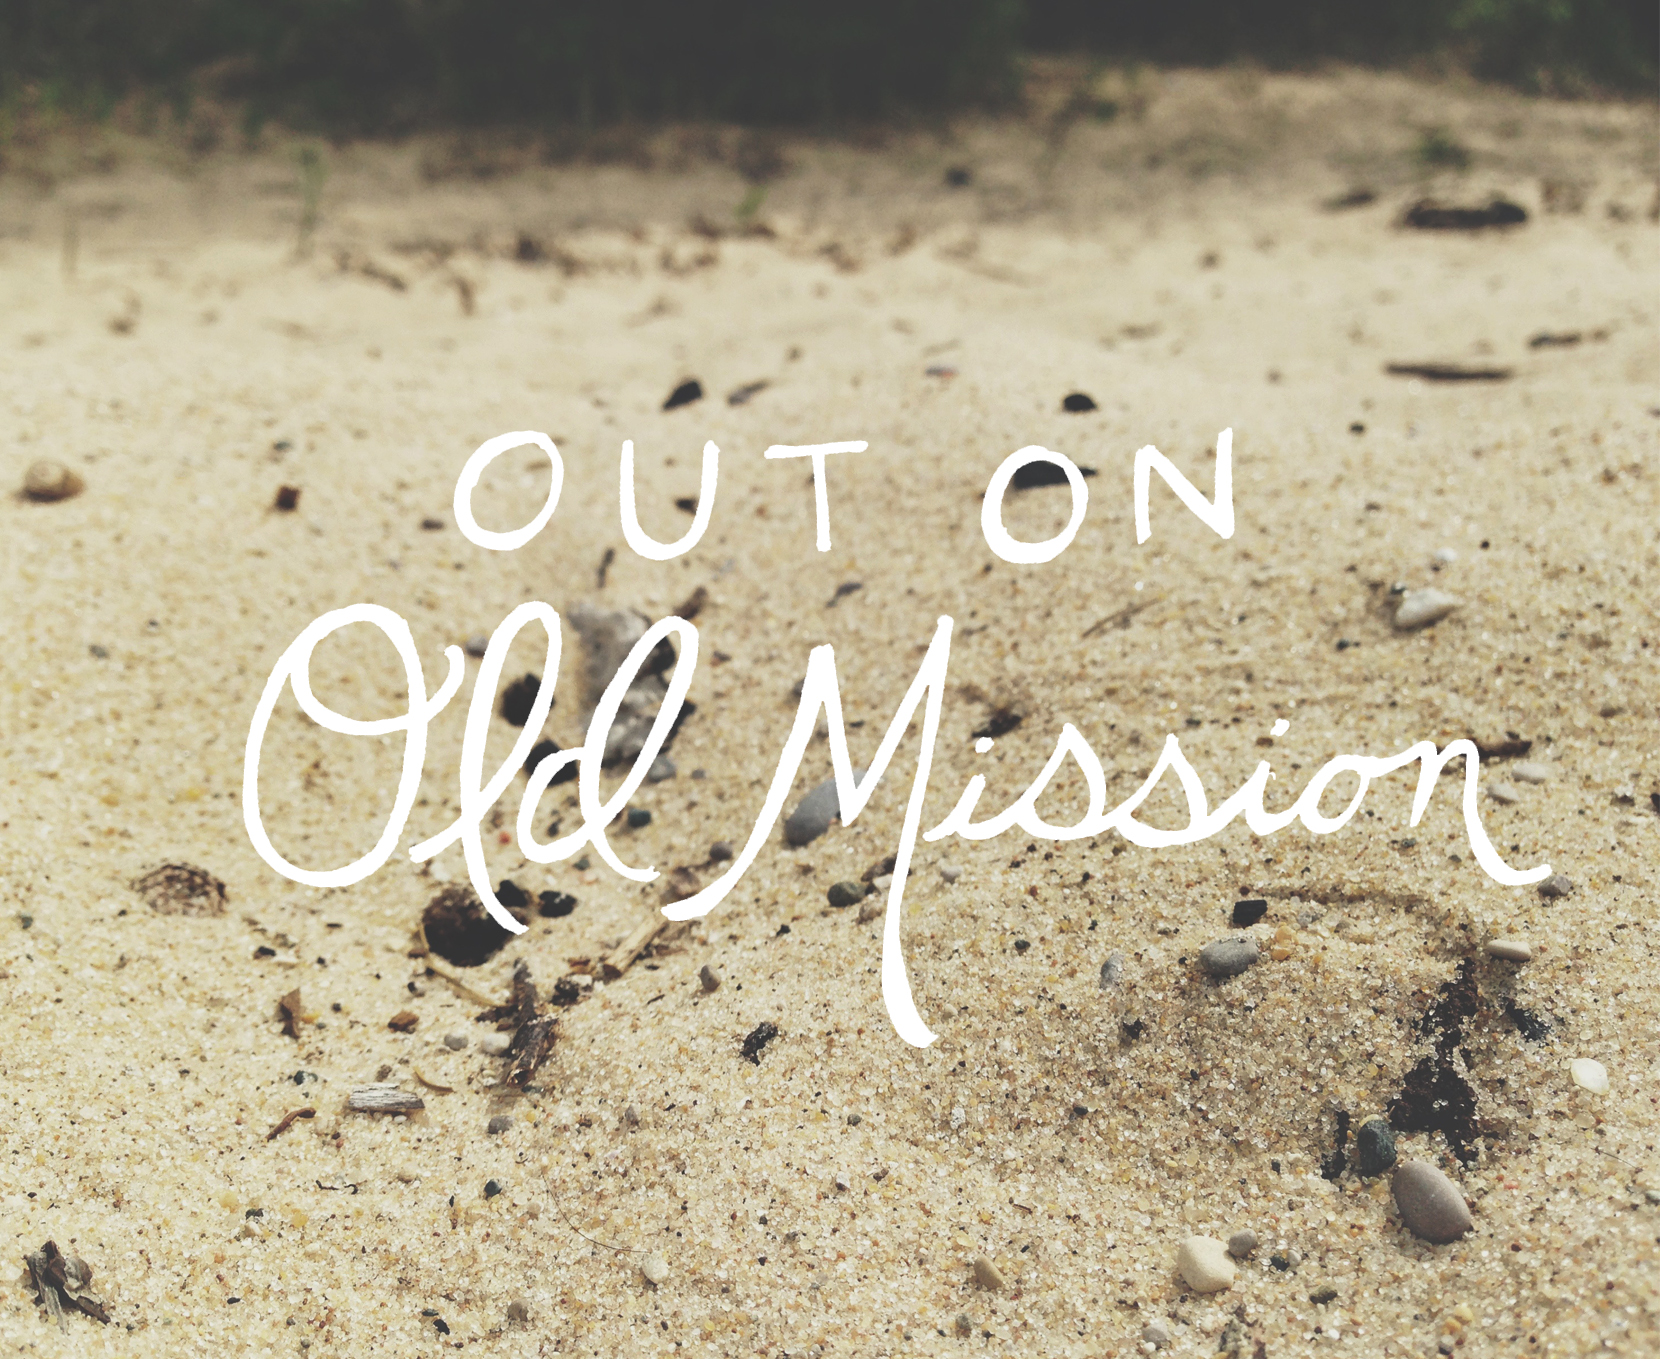 A Day on Old Mission Peninsula